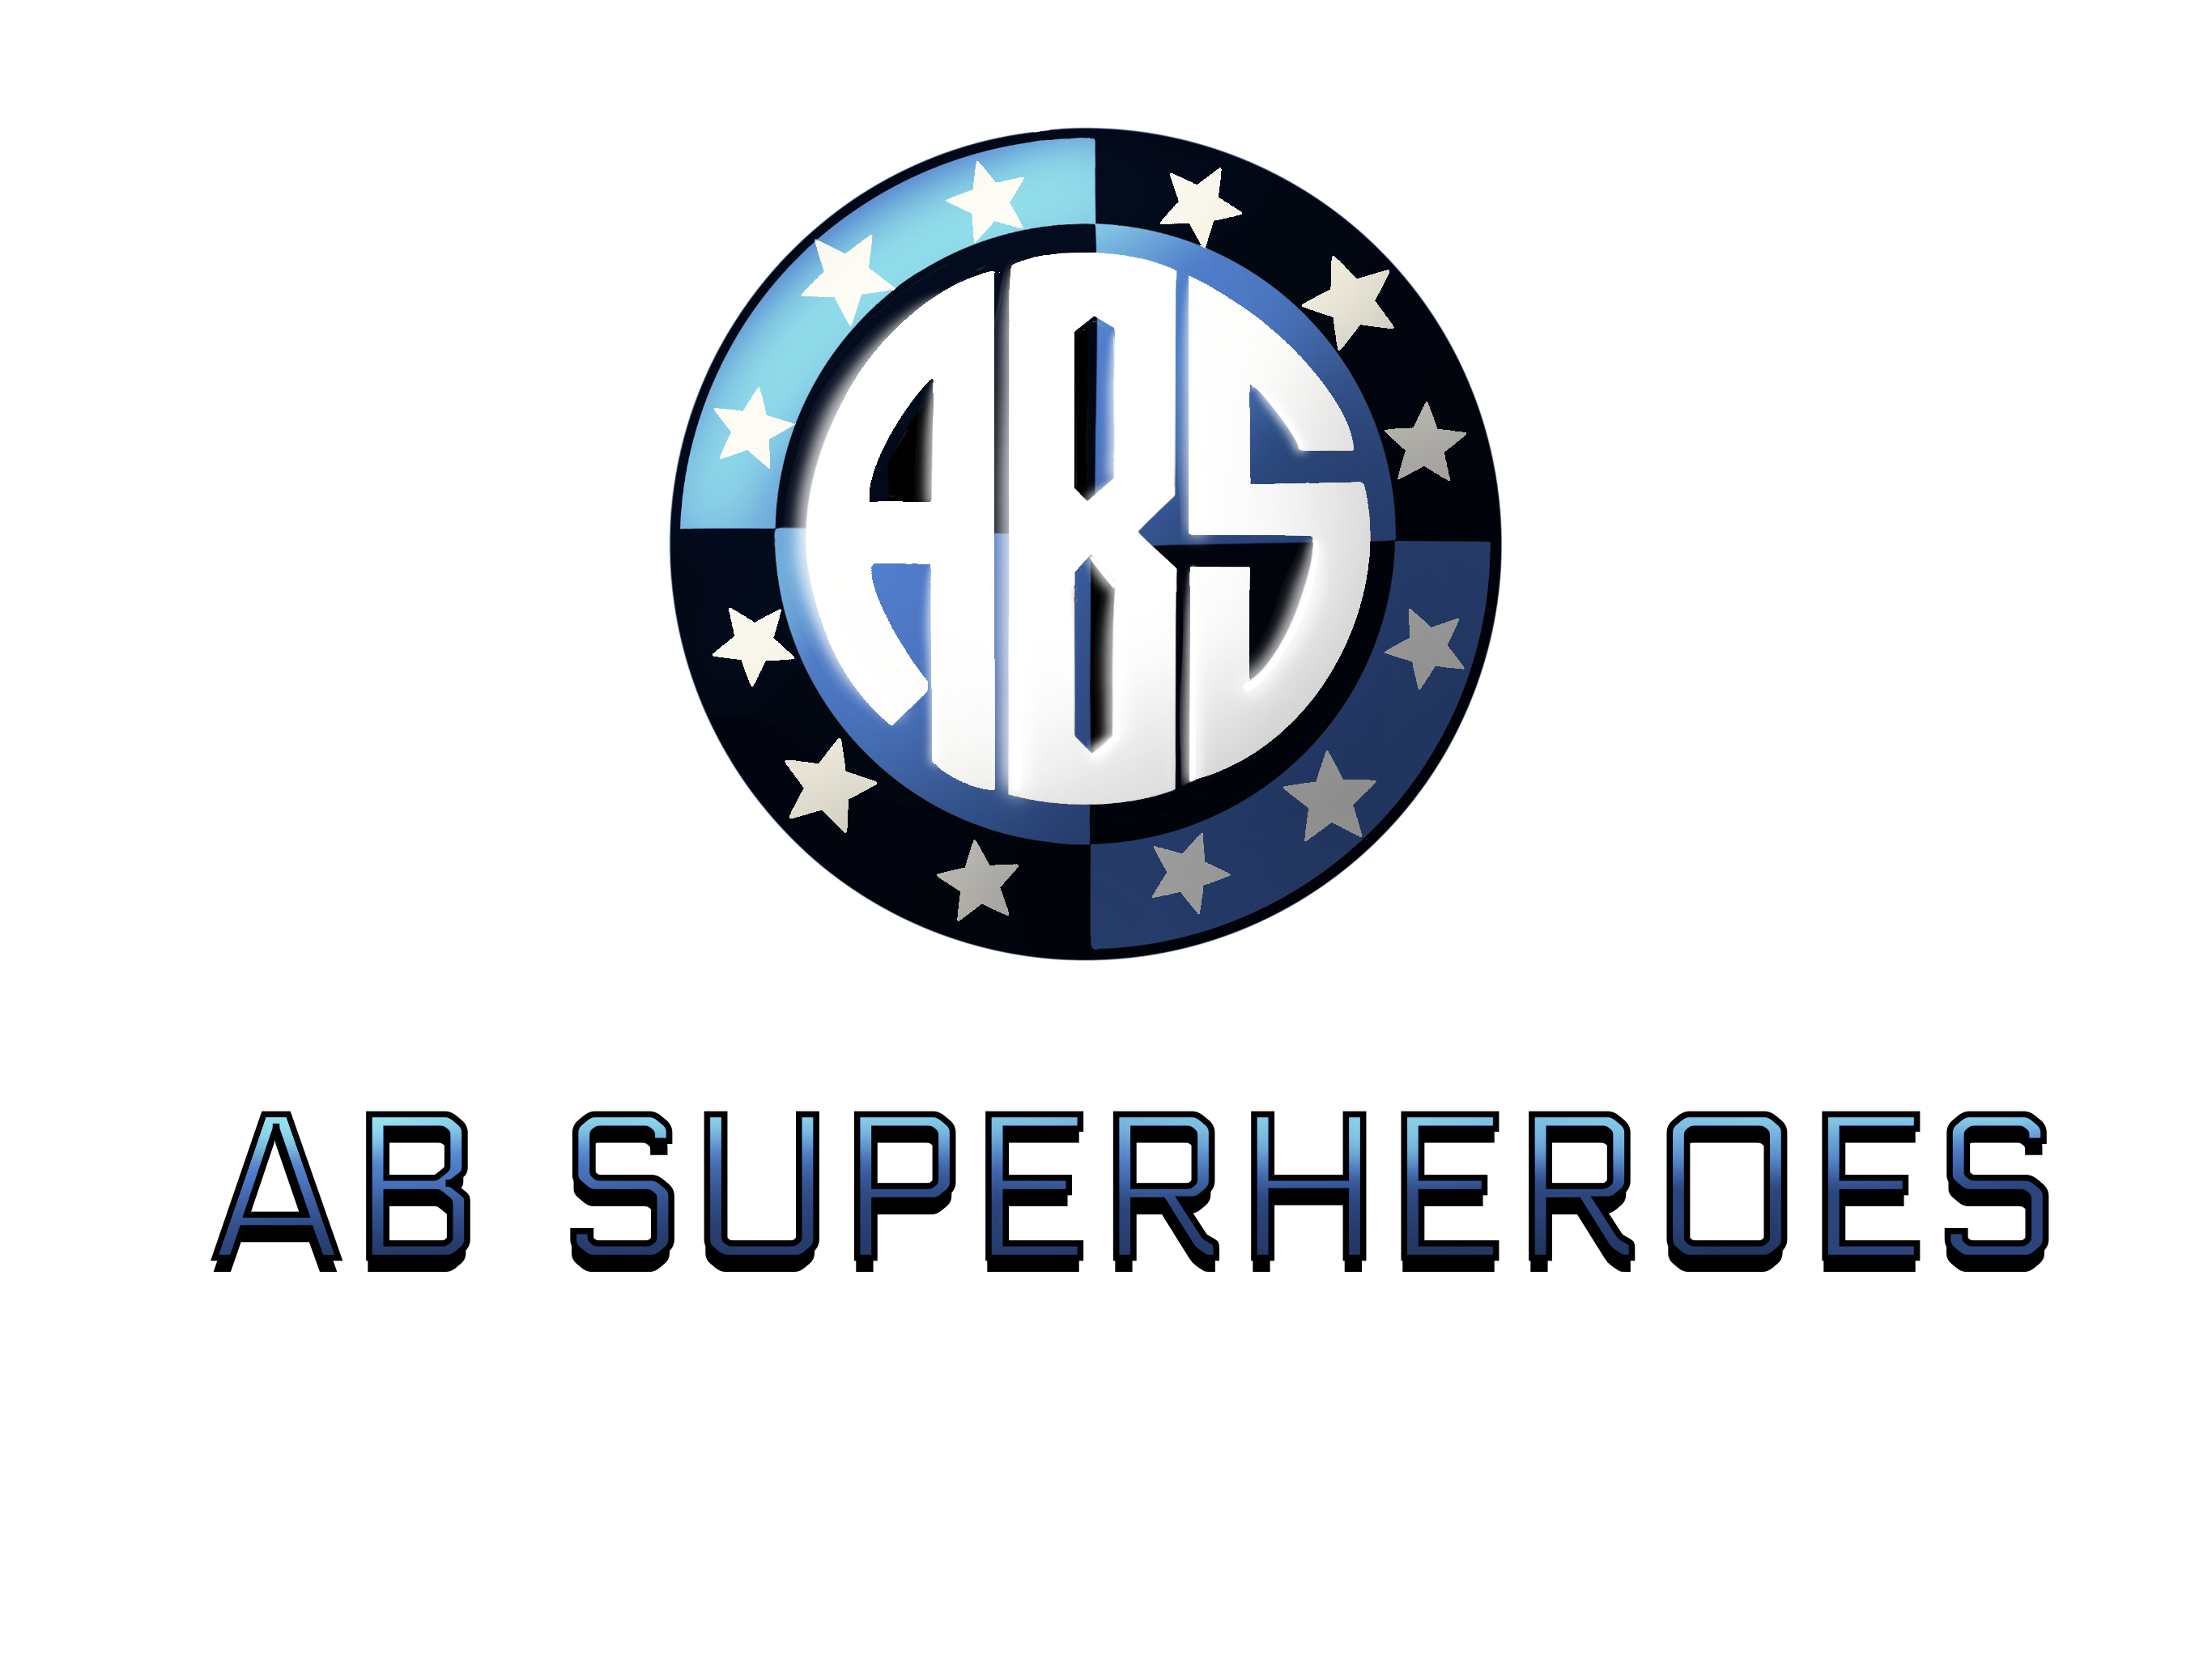 ABSuperheroes full logo with image and text